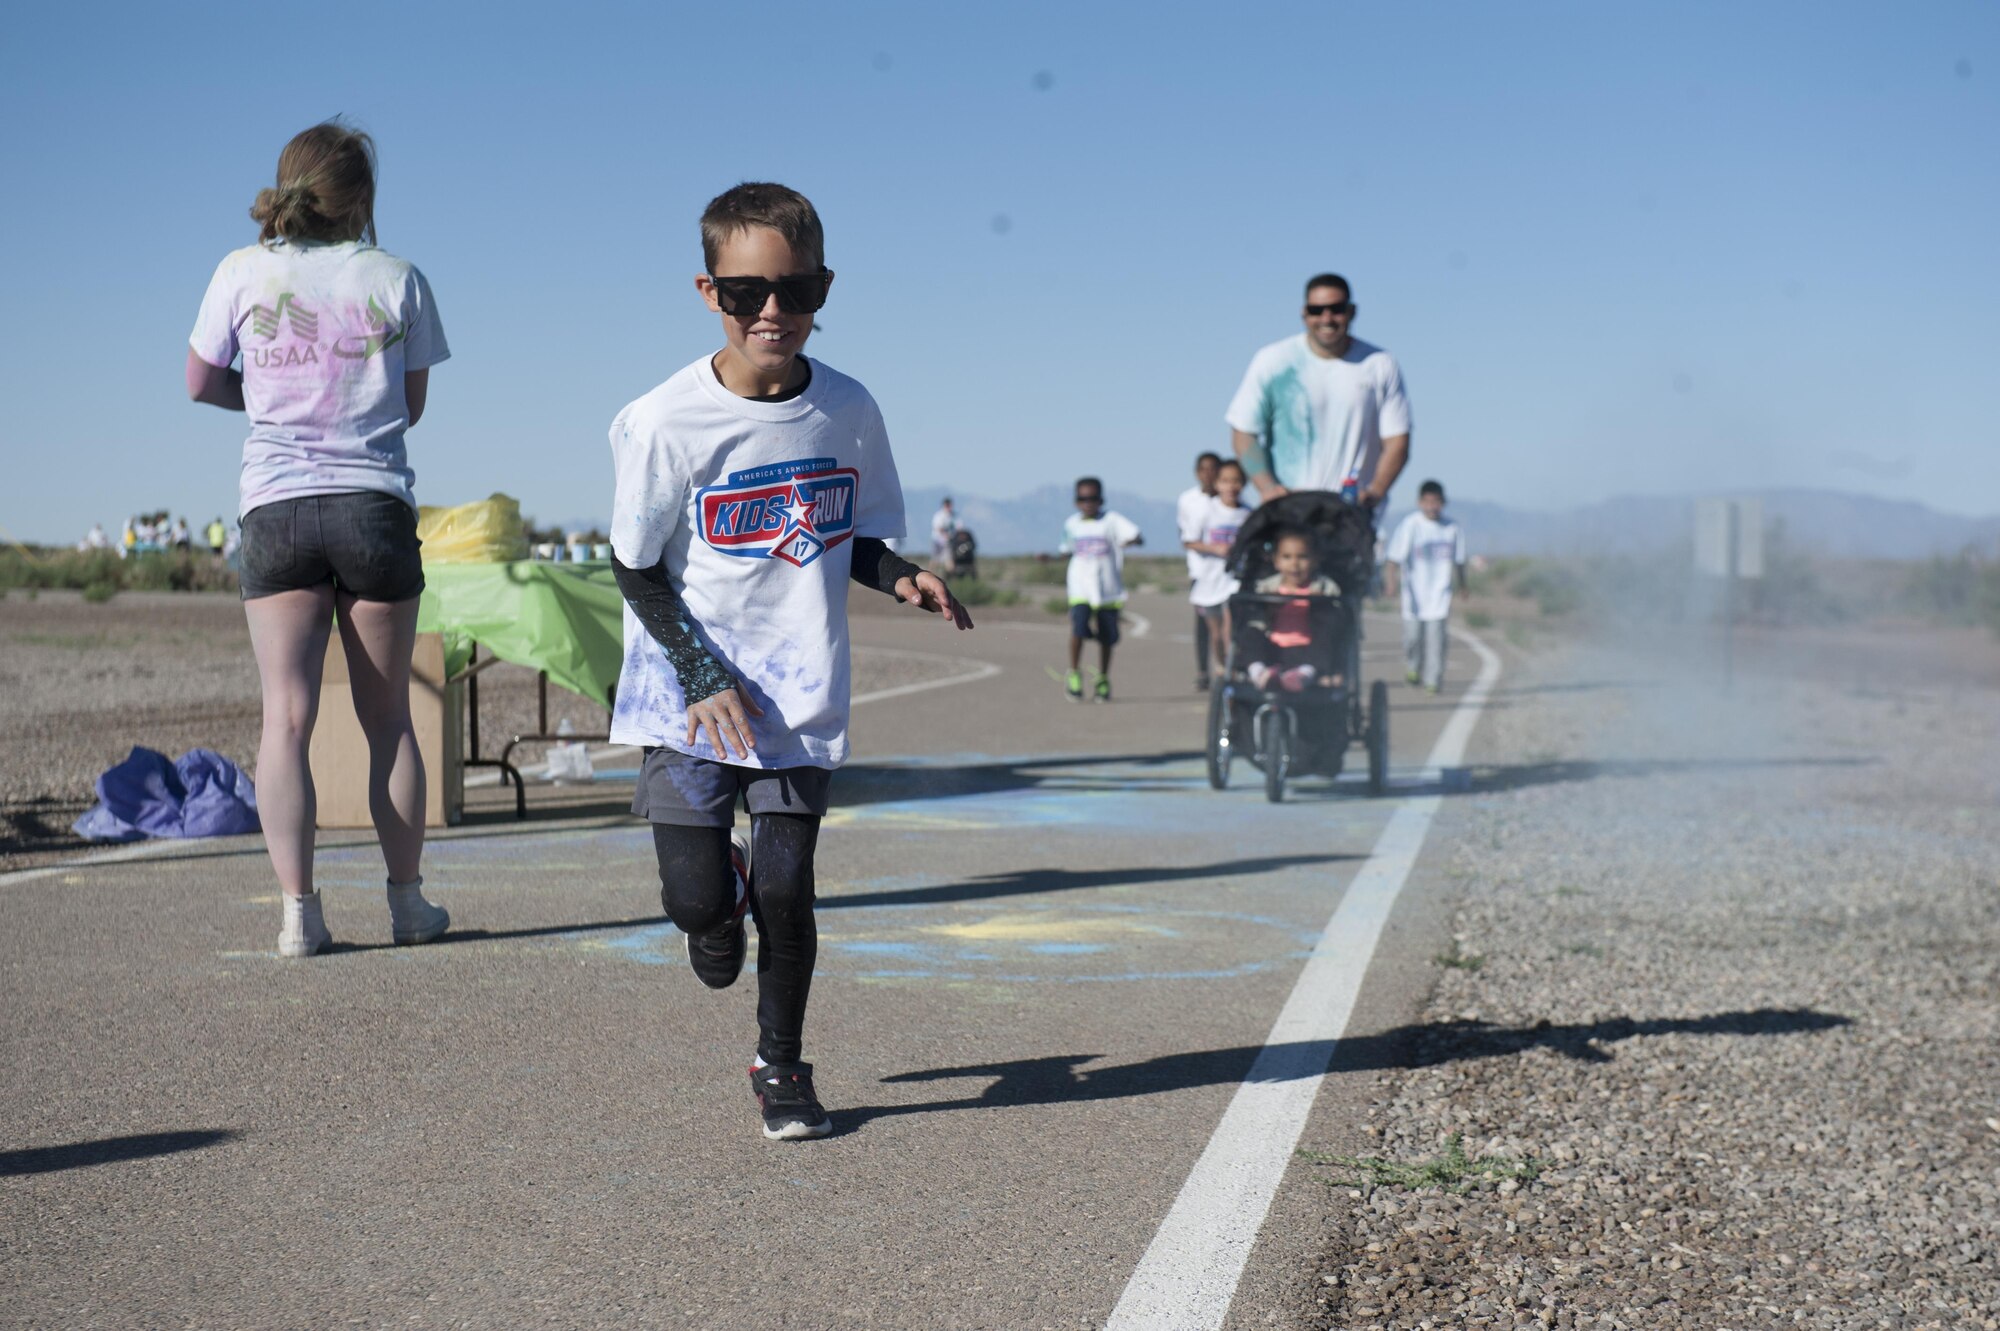 The Youth and Teen Center hosted the Art Blast color run 5K and the America’s Armed Forces Kids fun run at Holloman Air Force Base, N.M on May 20, 2017. During the run, younger children run a half mile, seven and eight year olds run one mile, and the older children run two miles. (U.S. Air Force photo by Airman 1st Class Ilyana A. Escalona)